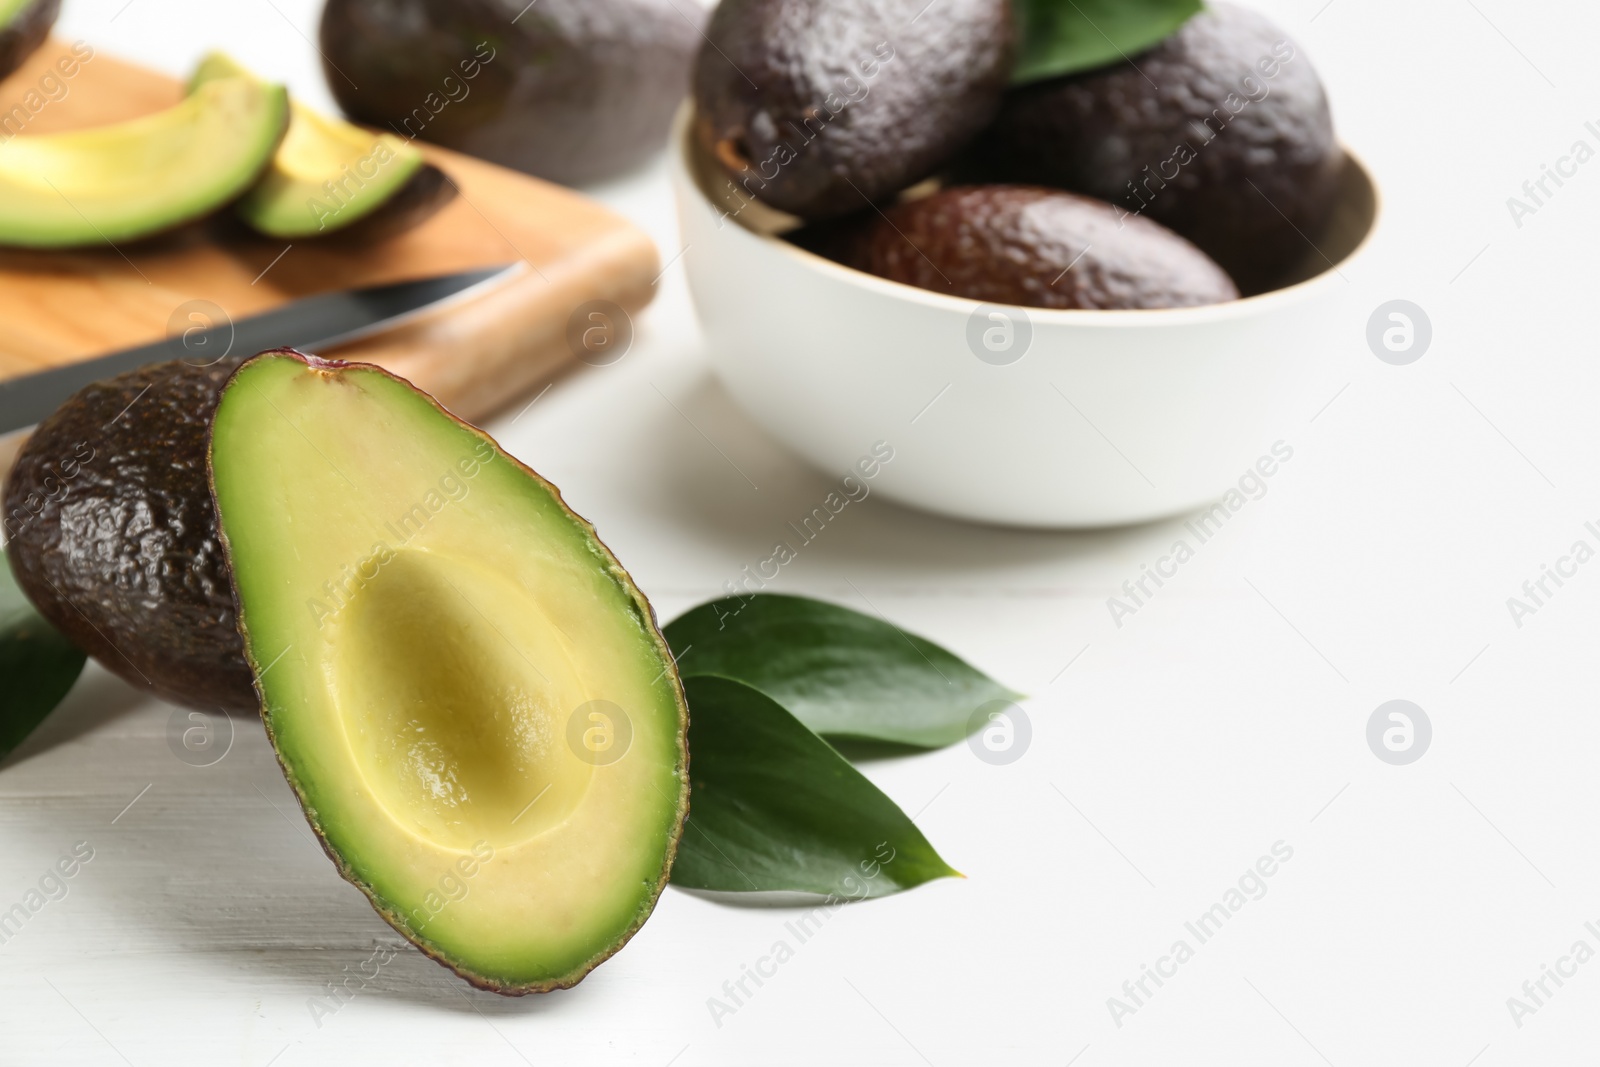 Photo of Whole and cut avocados with green leaves on white table